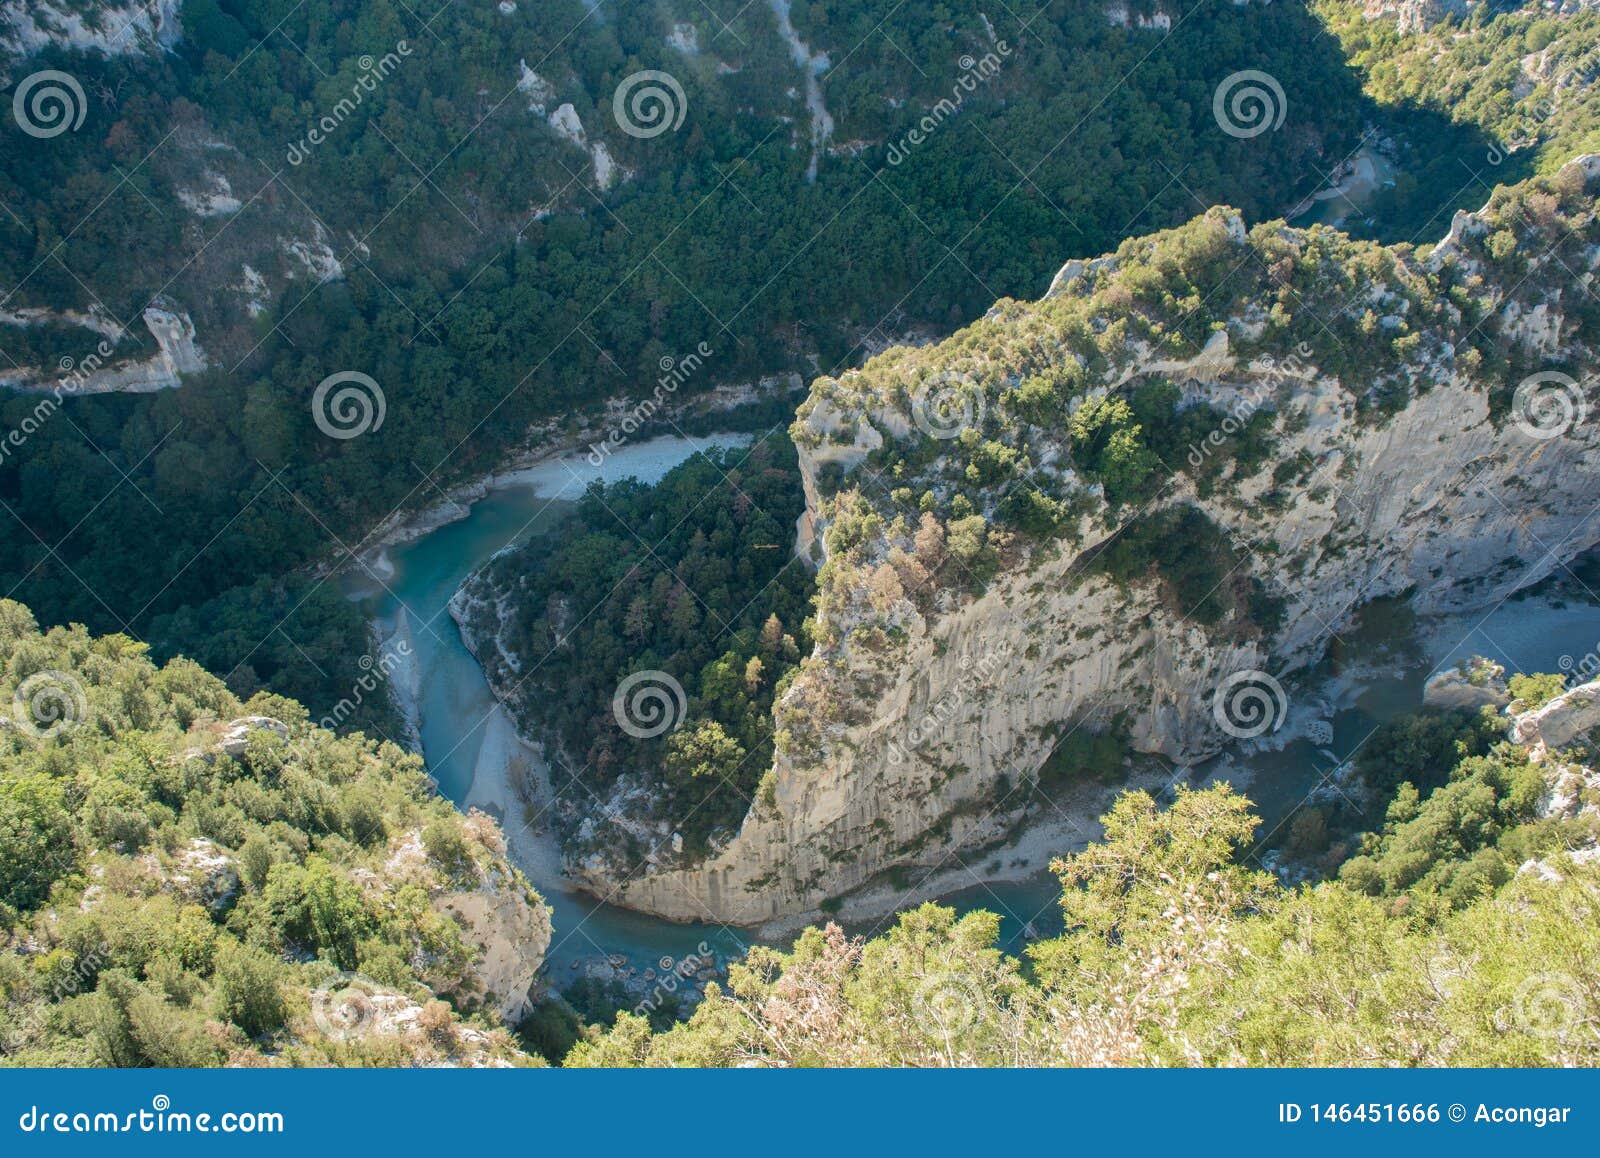 view to verdon river from the mescla balconies, france